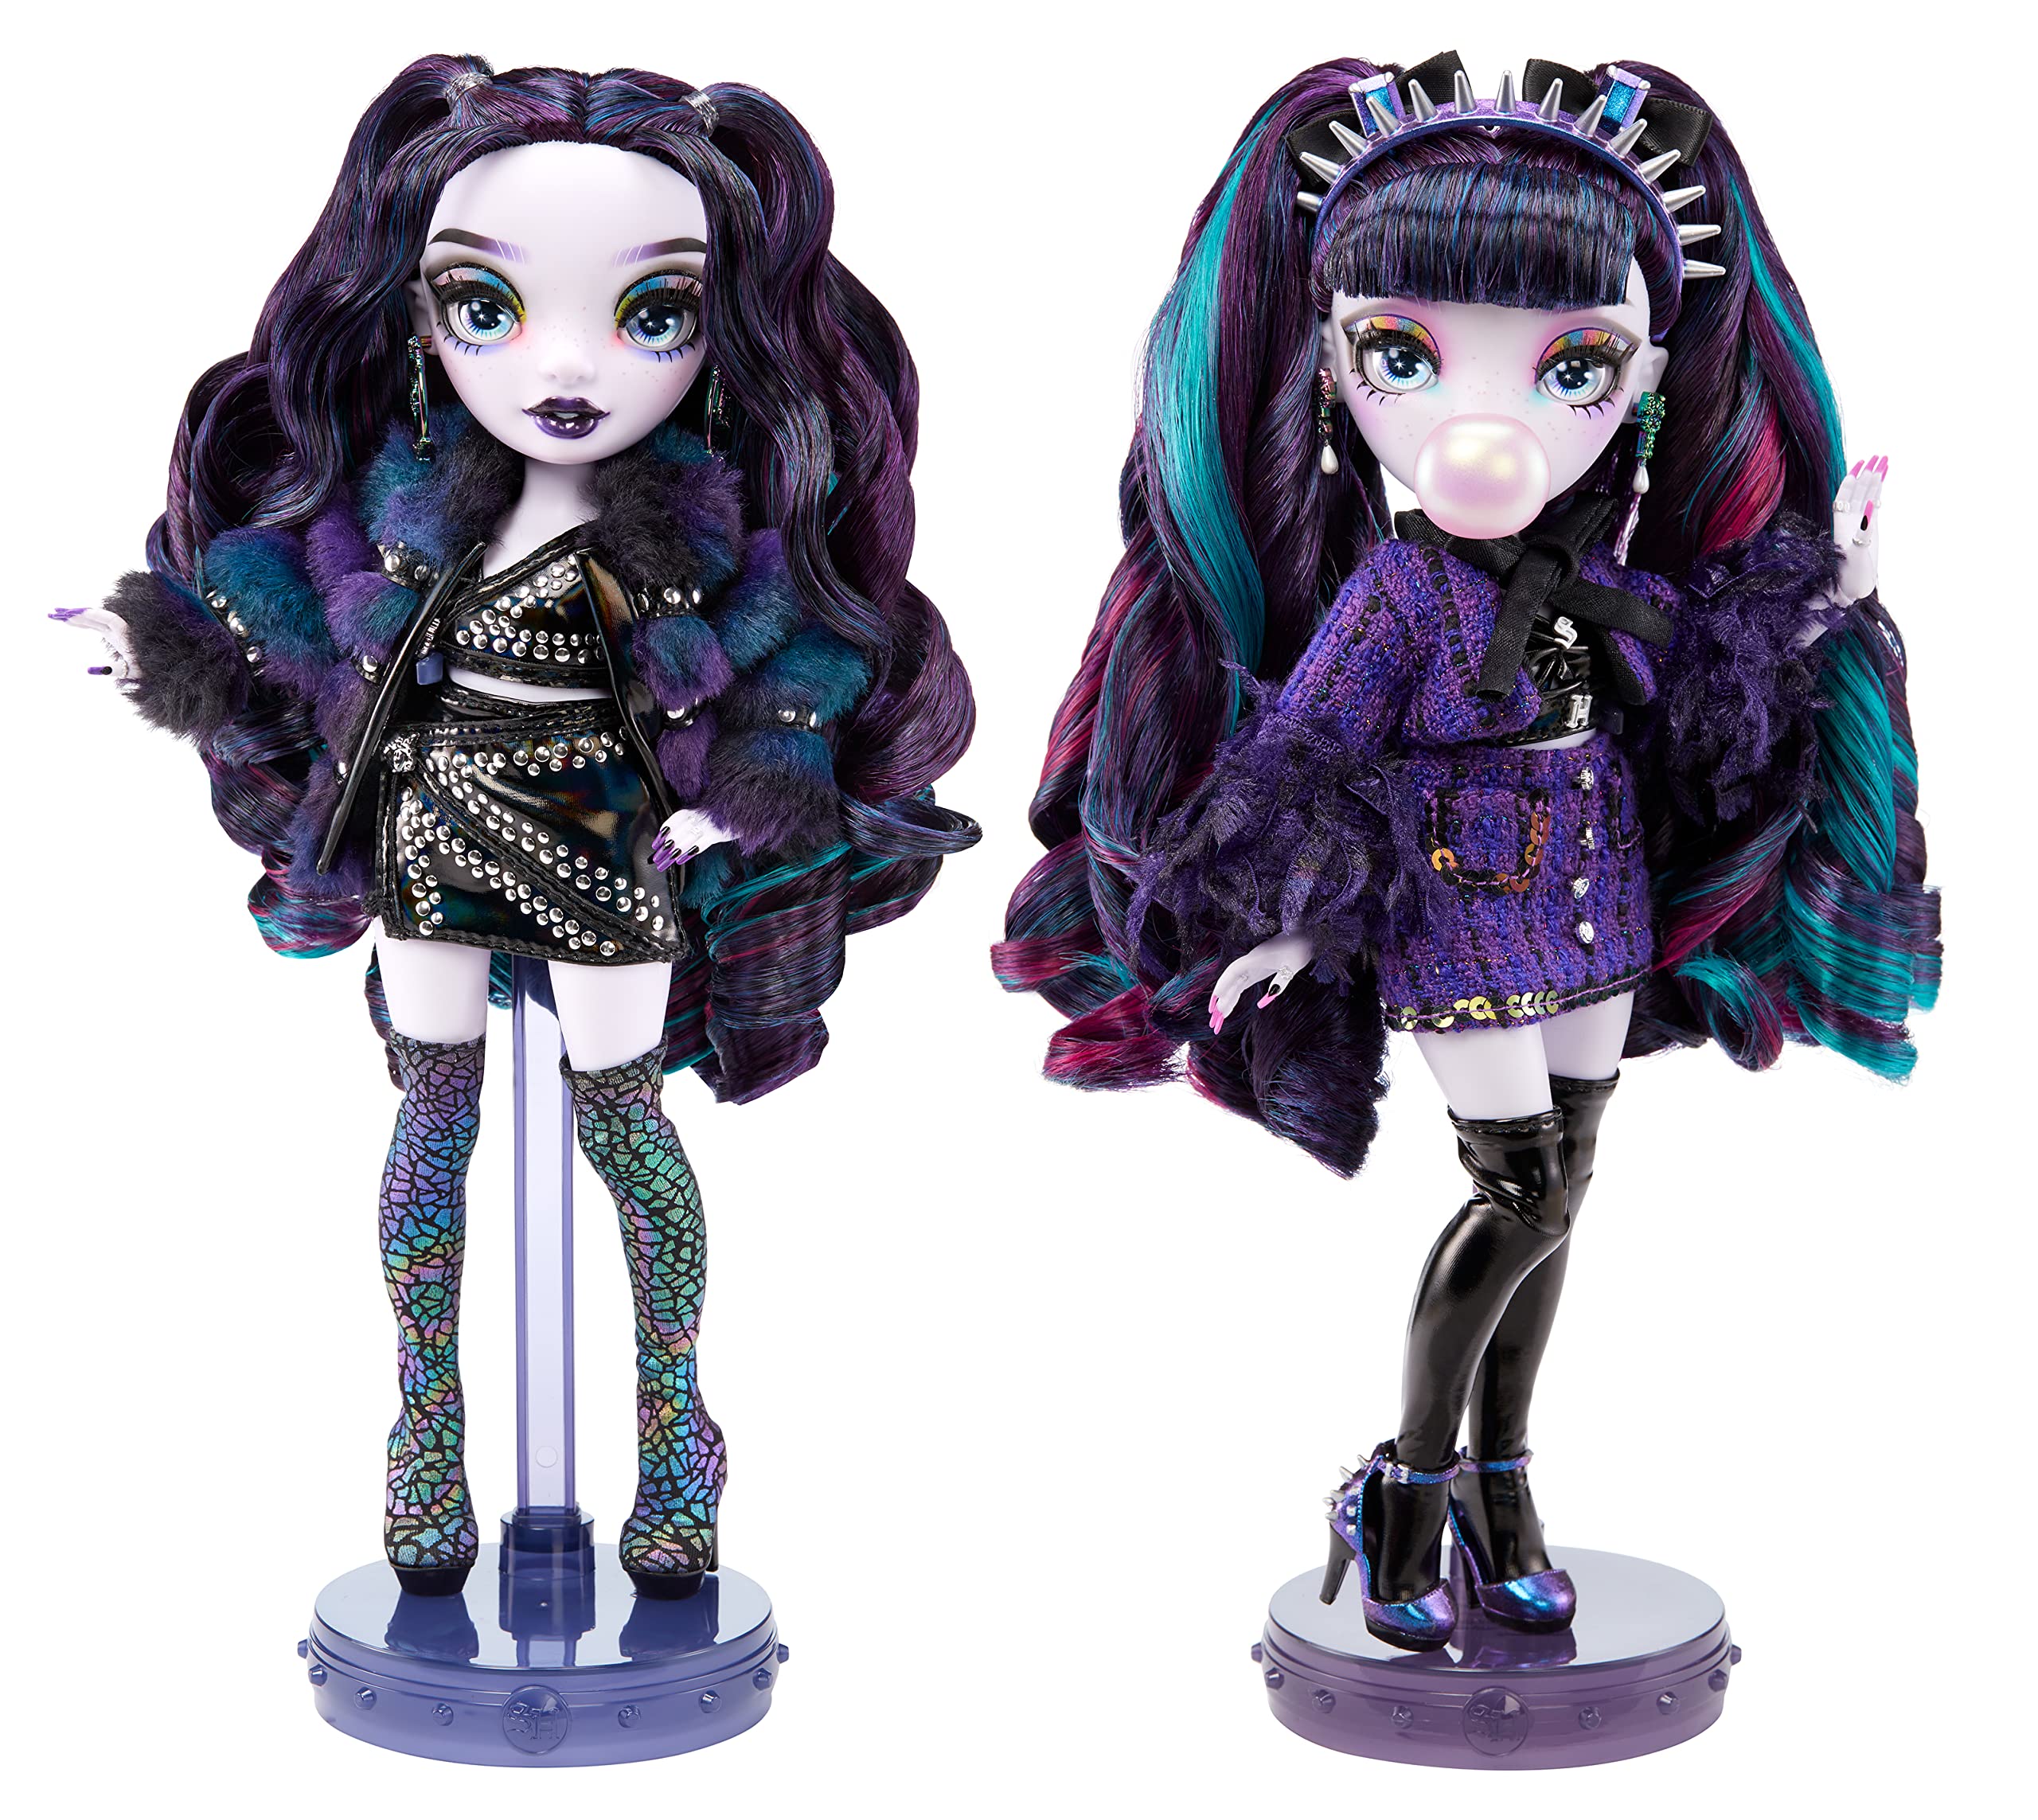 Rainbow High Shadow High Special Edition Twins- 2-Pack Fashion Doll. Purple & Black Designer Outfits with Accessories, Great Gift for Kids 6-12 Years Old & Collectors, Multicolor, 585879